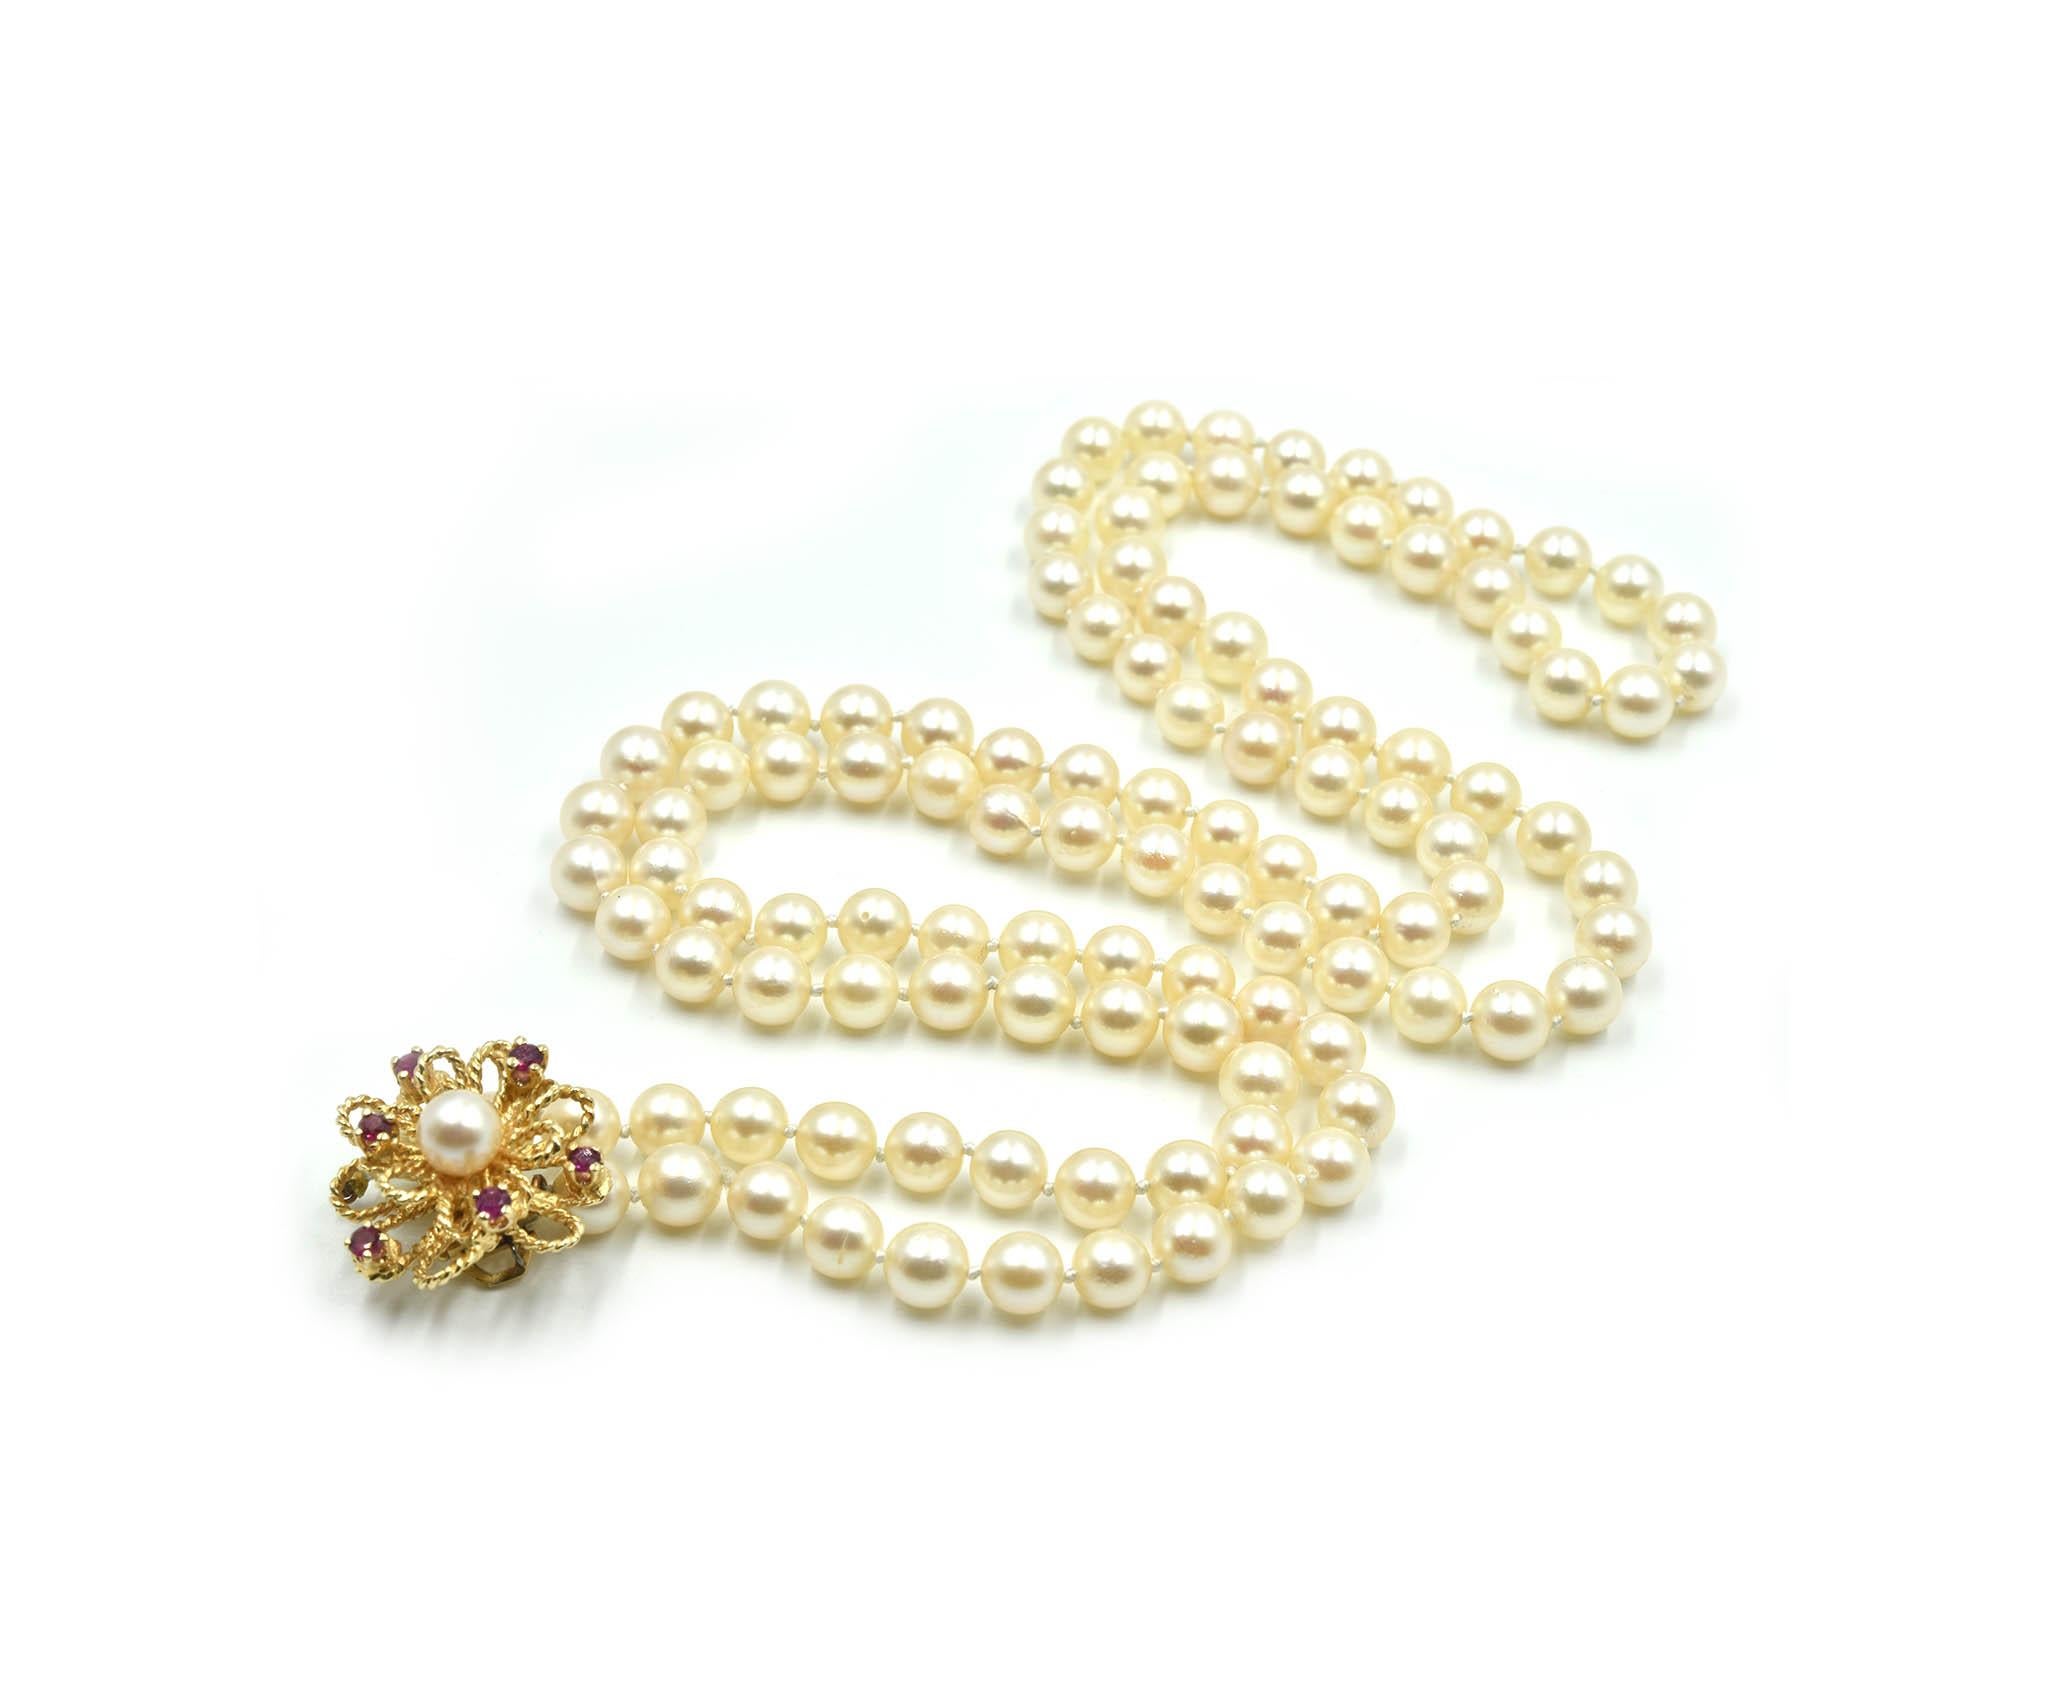 Women's Pearl Strand Necklace with 14 Karat Yellow Gold Ruby Flower Centerpiece